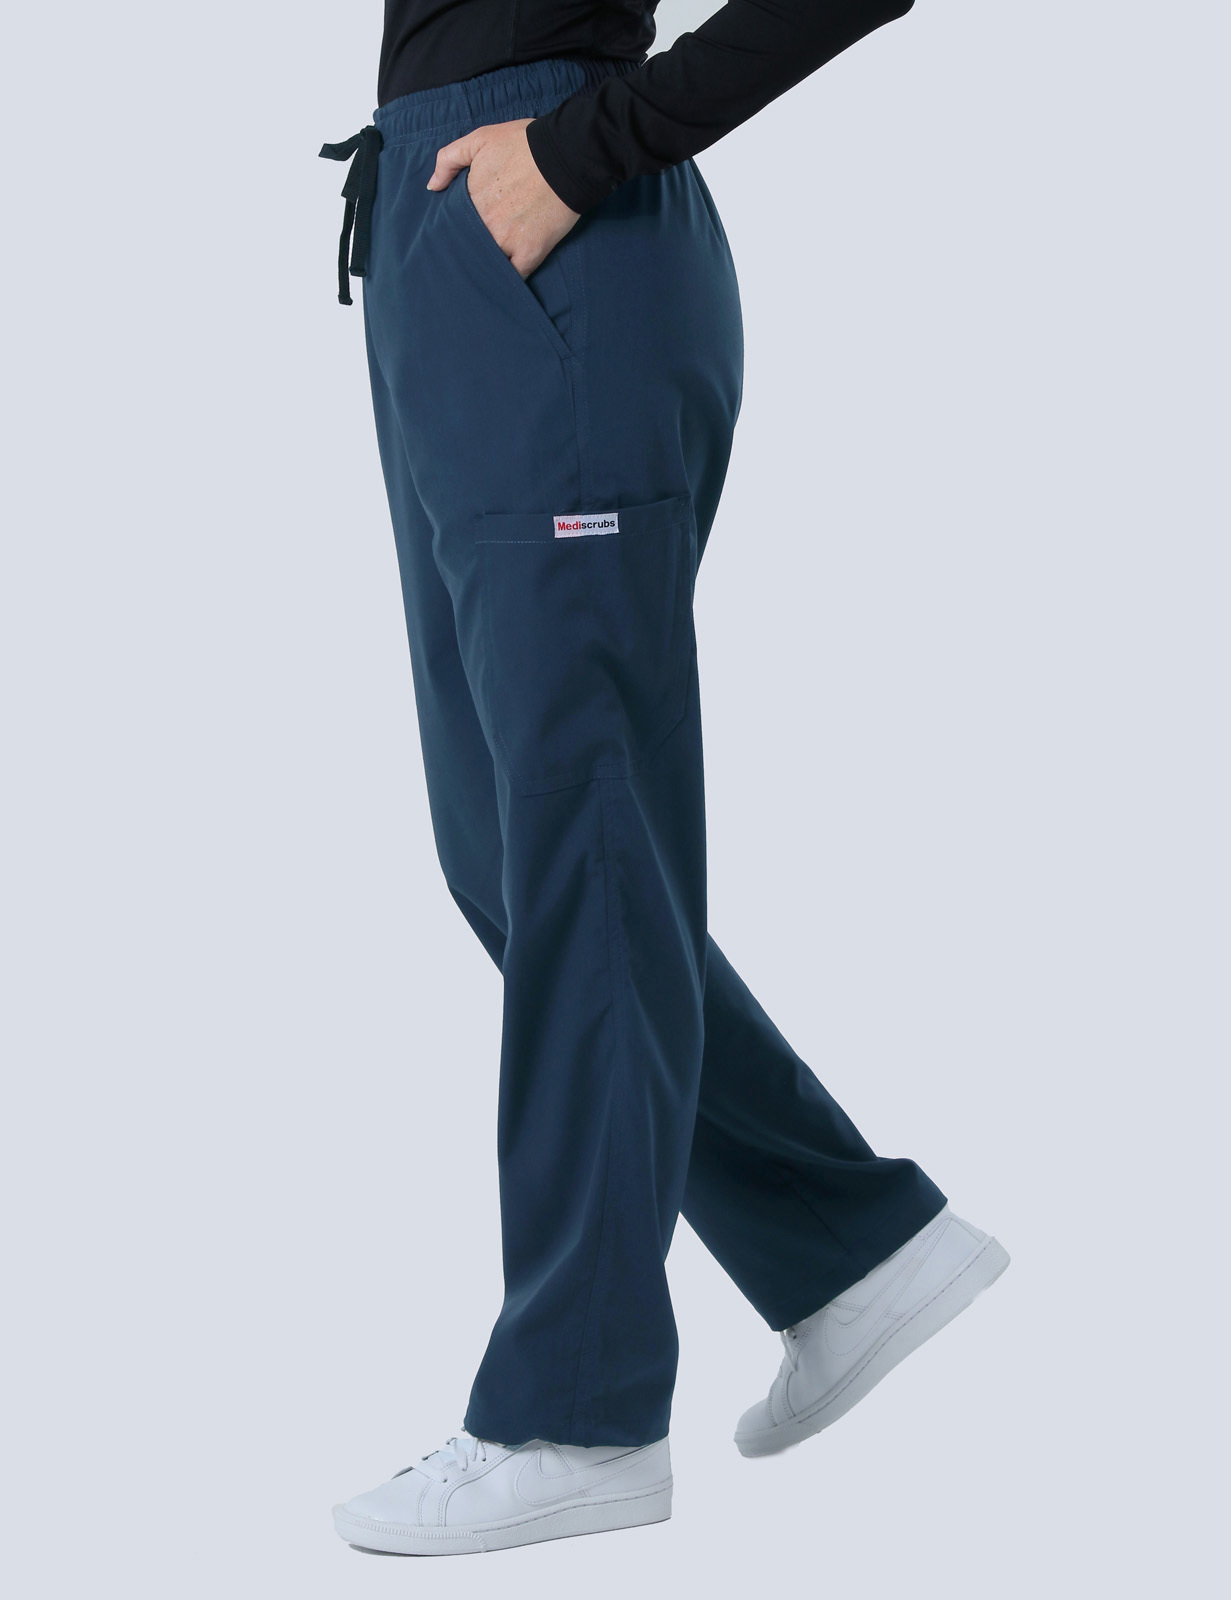 Royal Melbourne Hospital - ED (4 Pocket Scrub Top and Cargo Pants in Navy incl Logos)